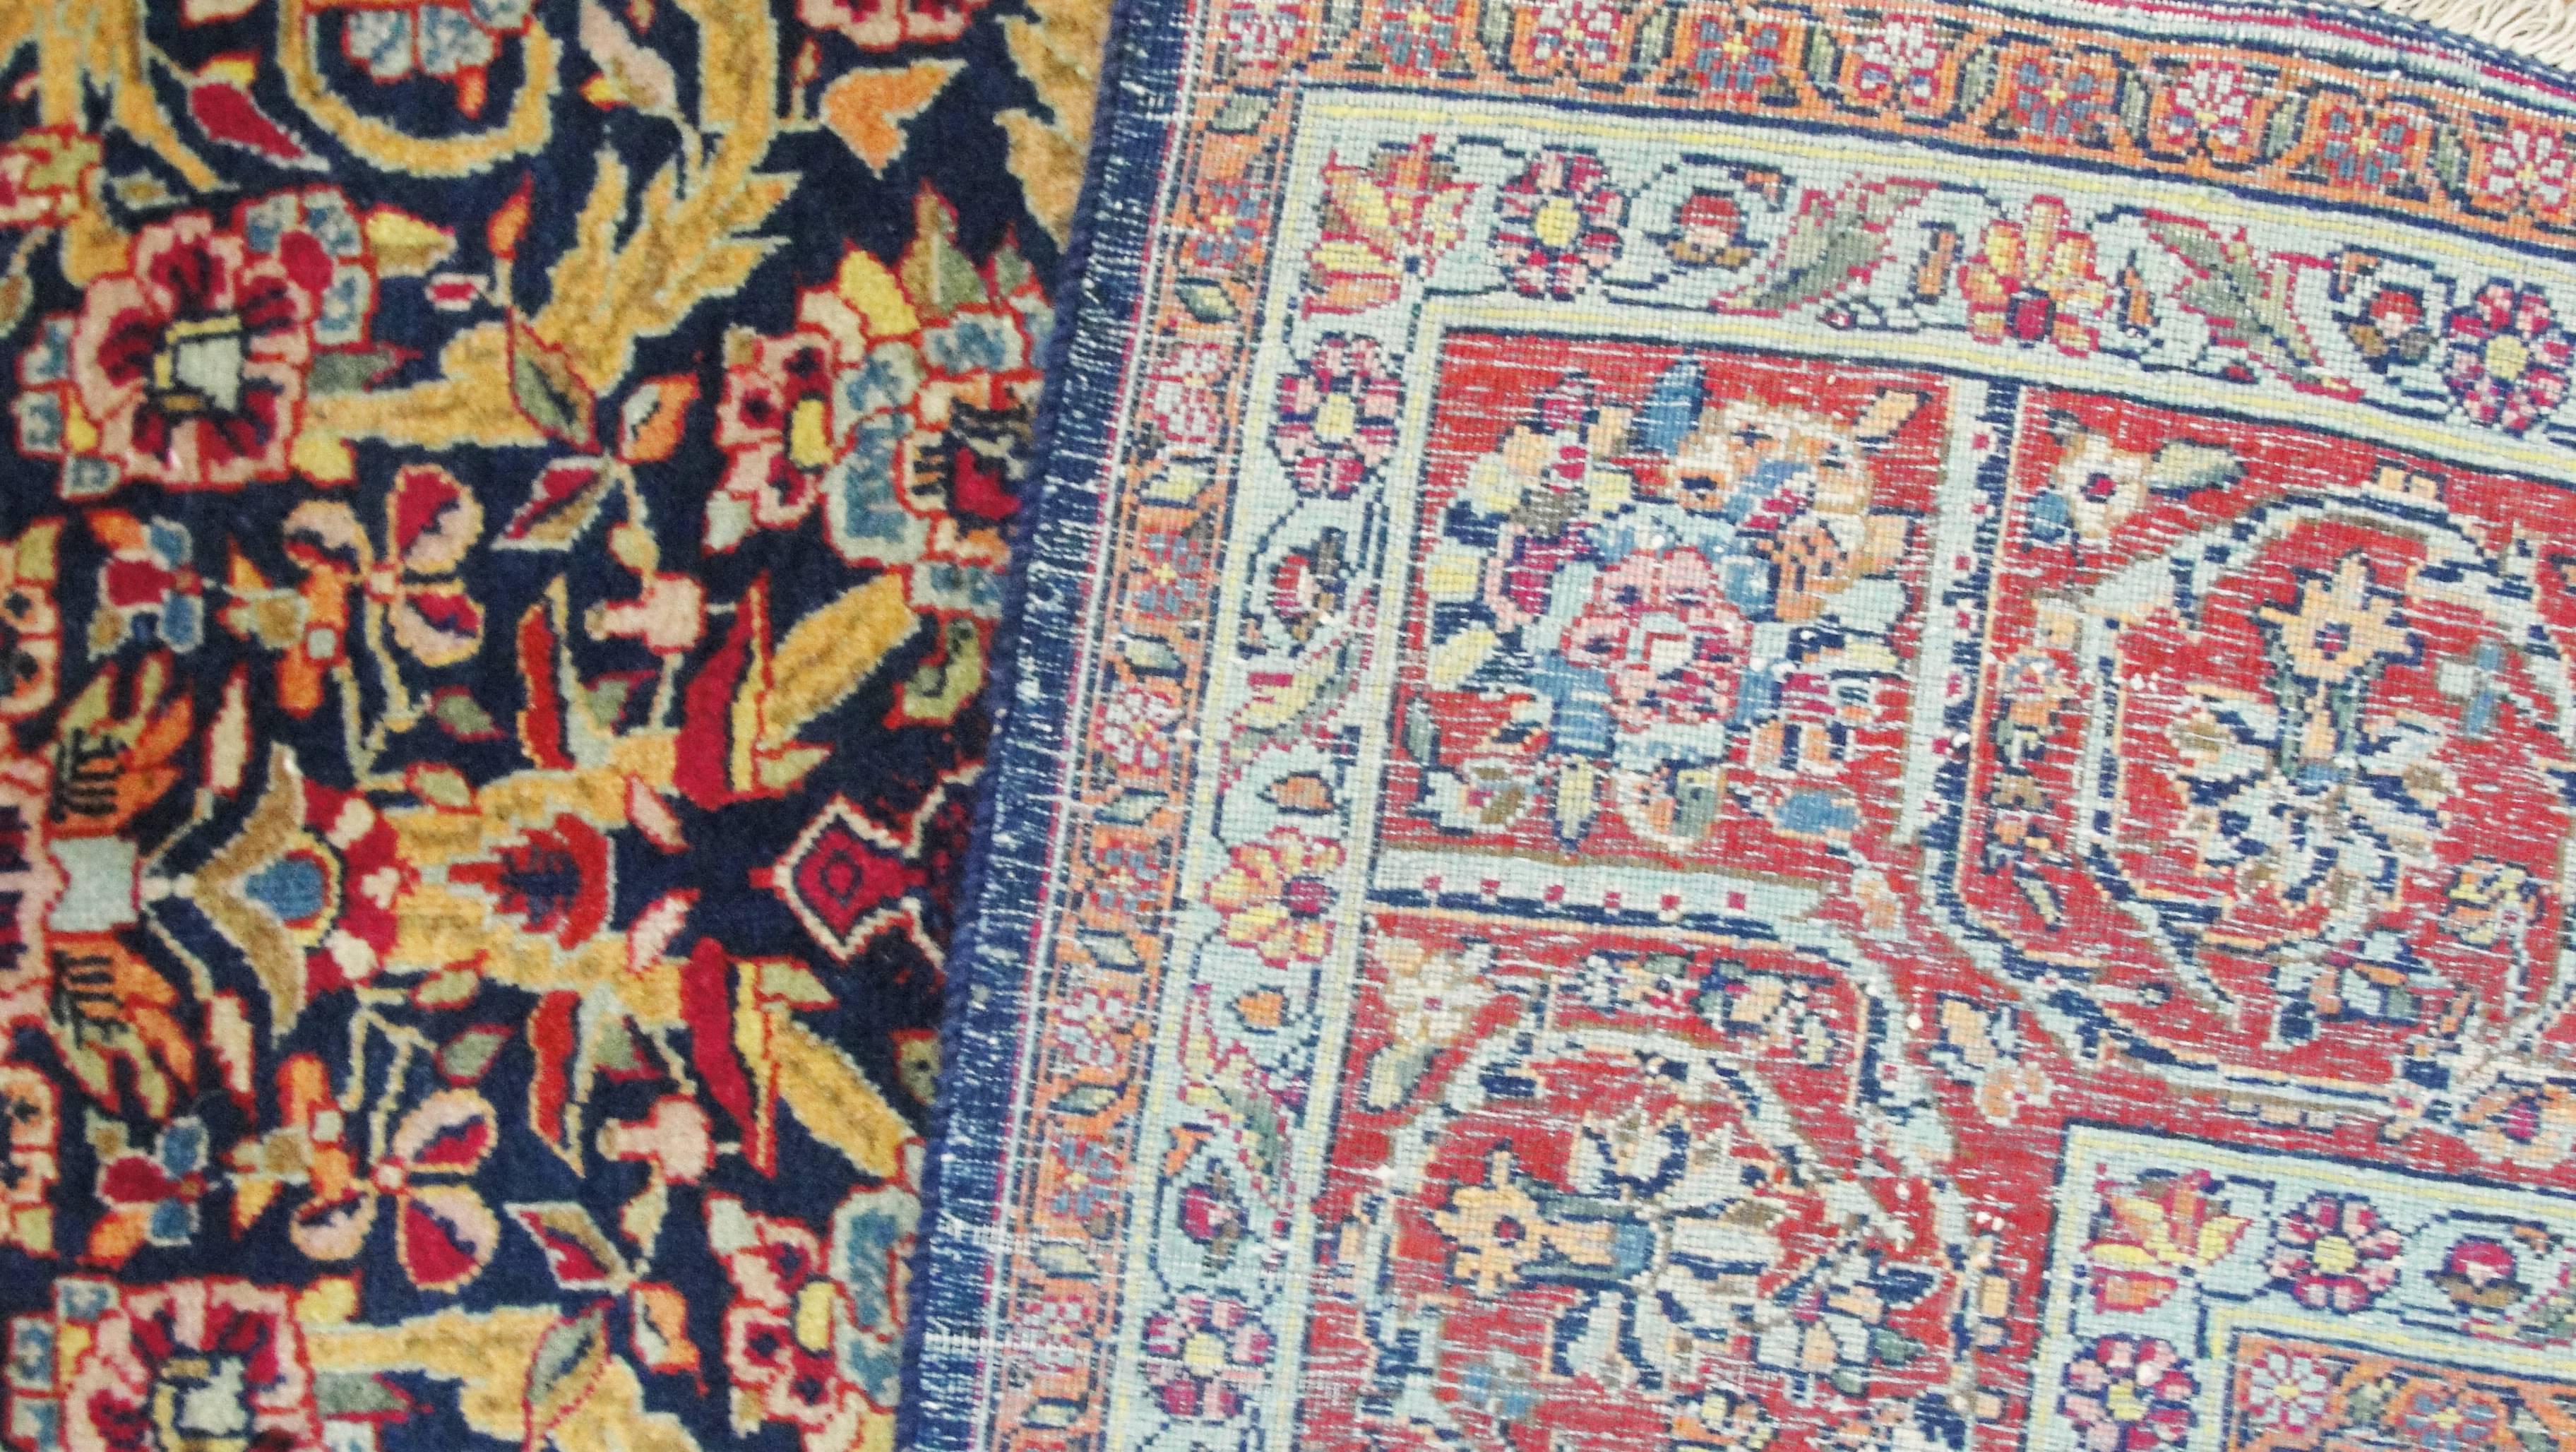 A Kashan rug is made in the city of kashan which is in Isfahan Province in North Central Iran. There was production of Persian carpet at Royal workshops in the 17th and early 18th century. The Persian carpet workshops ceased production in circa 1722